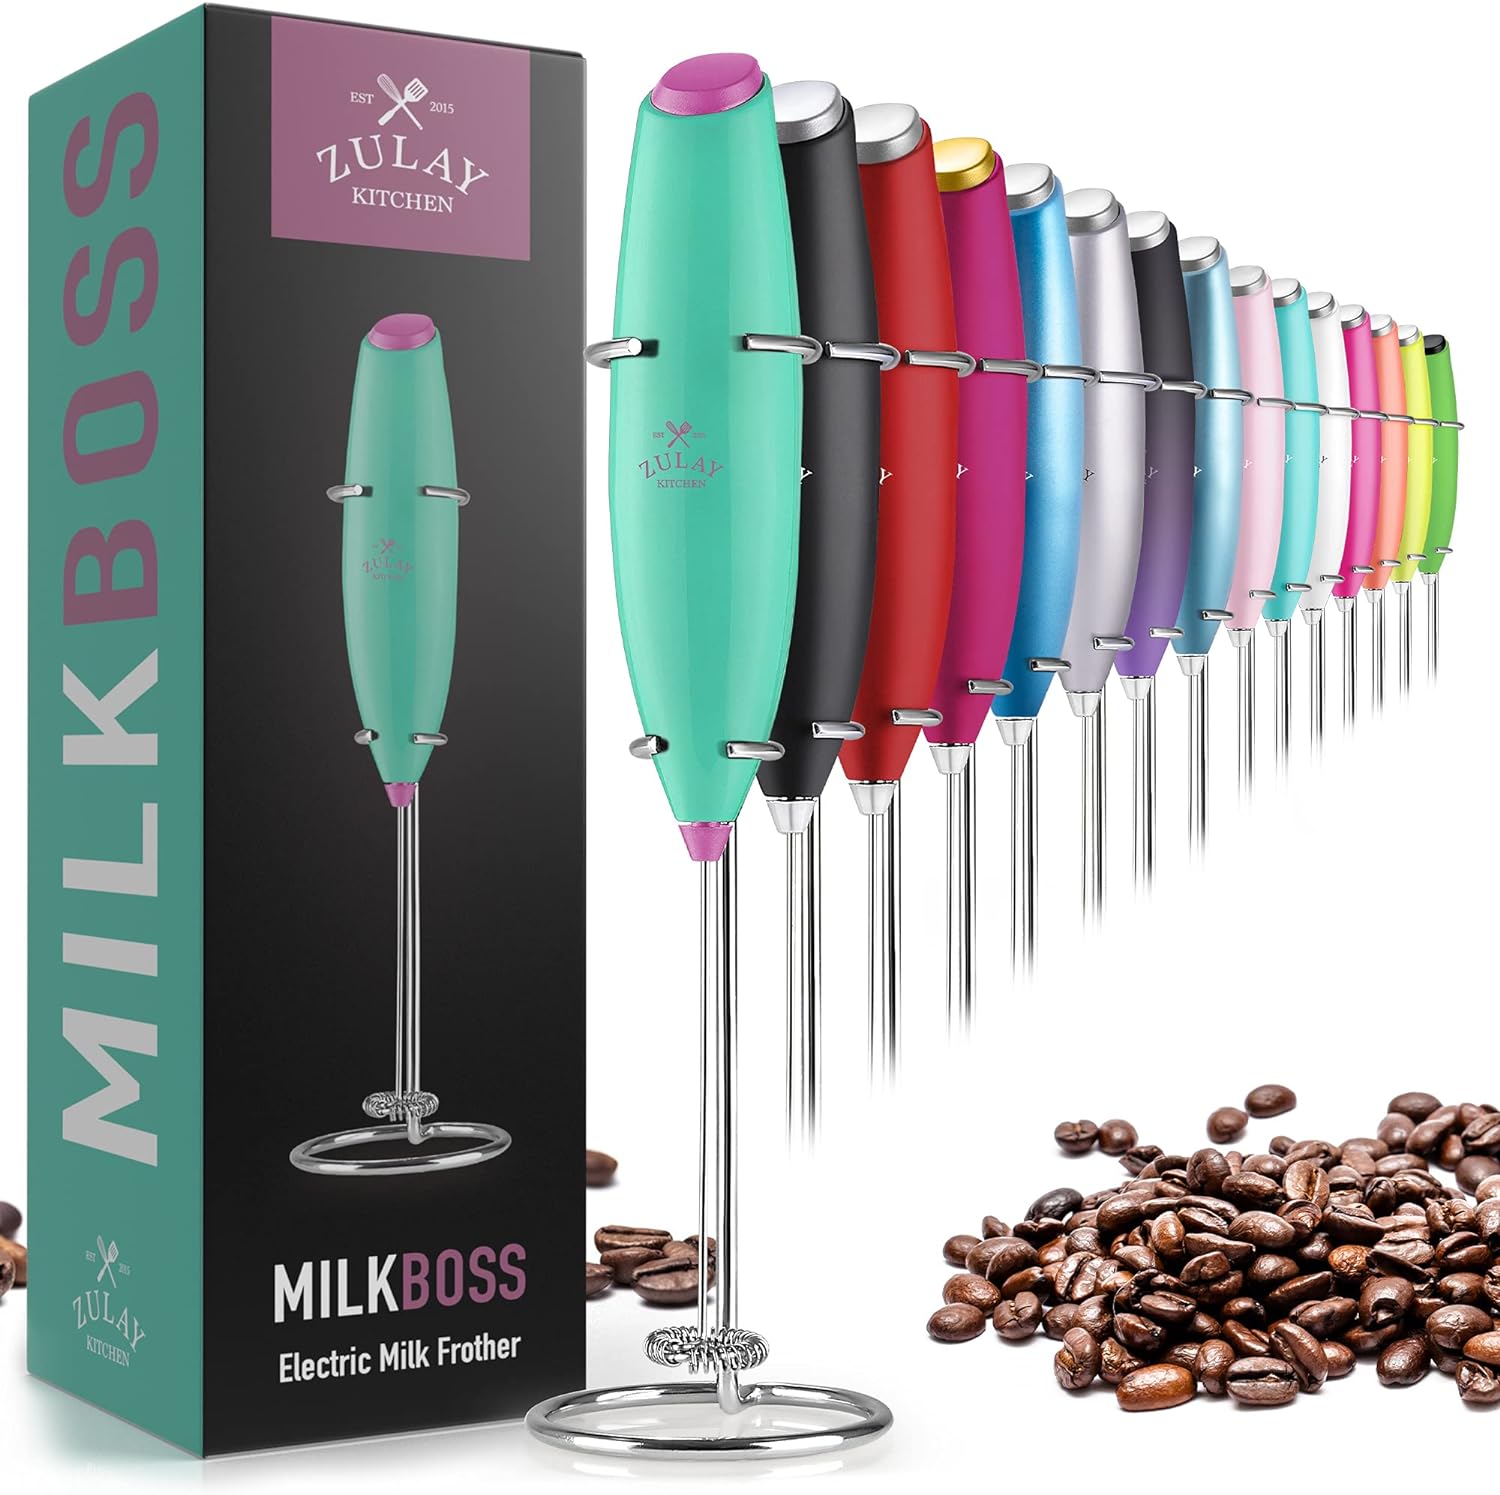 Zulay Powerful Milk Frother Handheld Foam Maker for Lattes – Whisk Drink Mixer for Coffee, Mini Foamer for Cappuccino, Frappe, Matcha, Hot Chocolate by Milk Boss (Teal/Lavender)